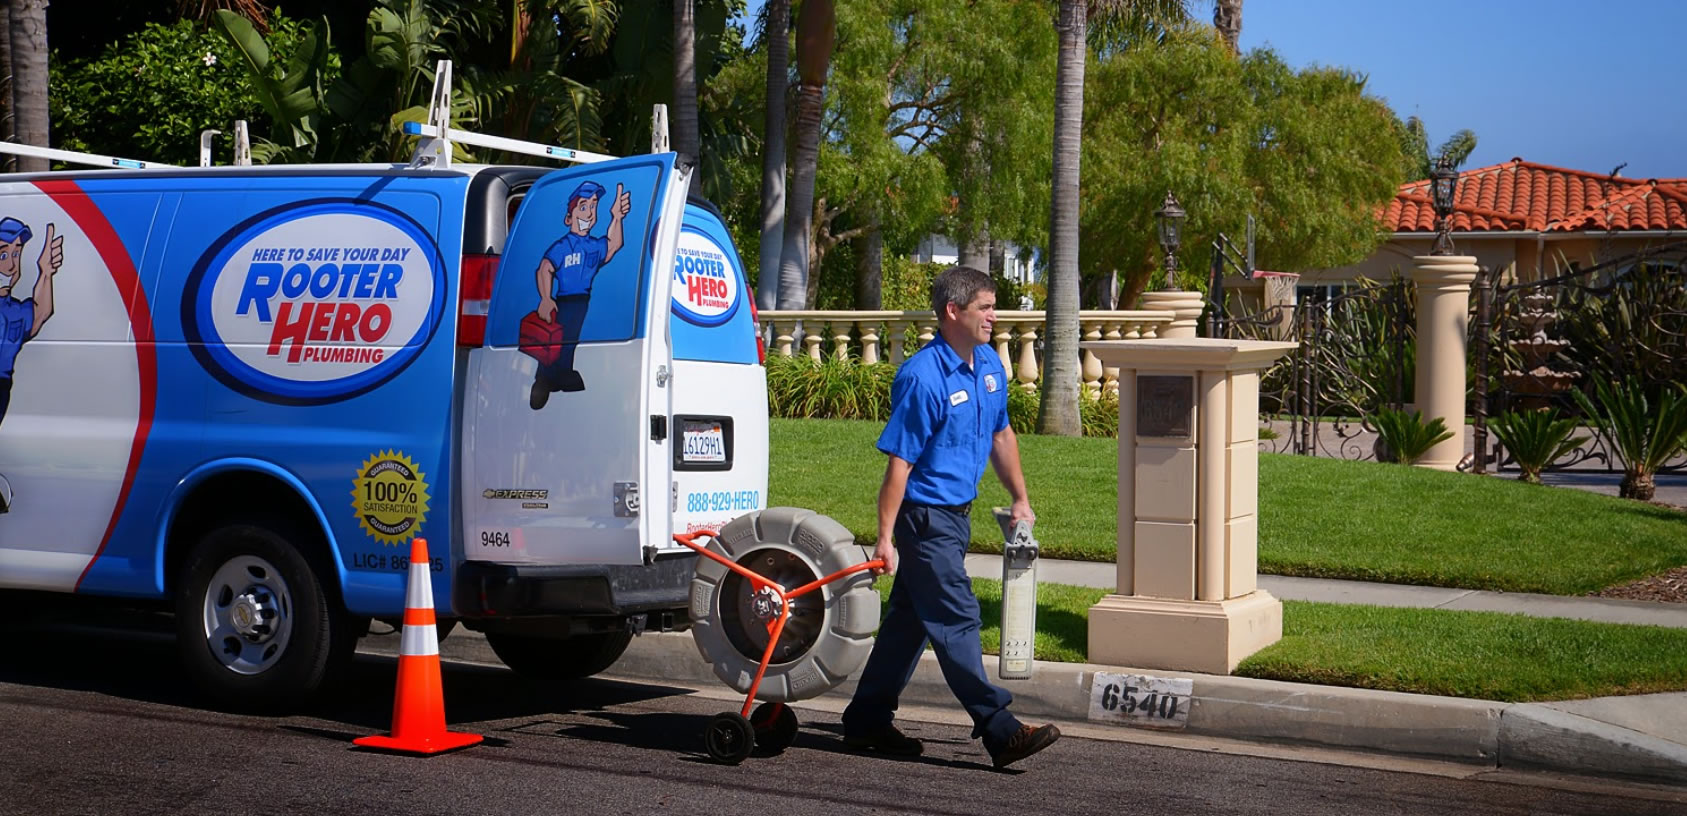 Drain Cleaning in Peoria, AZ